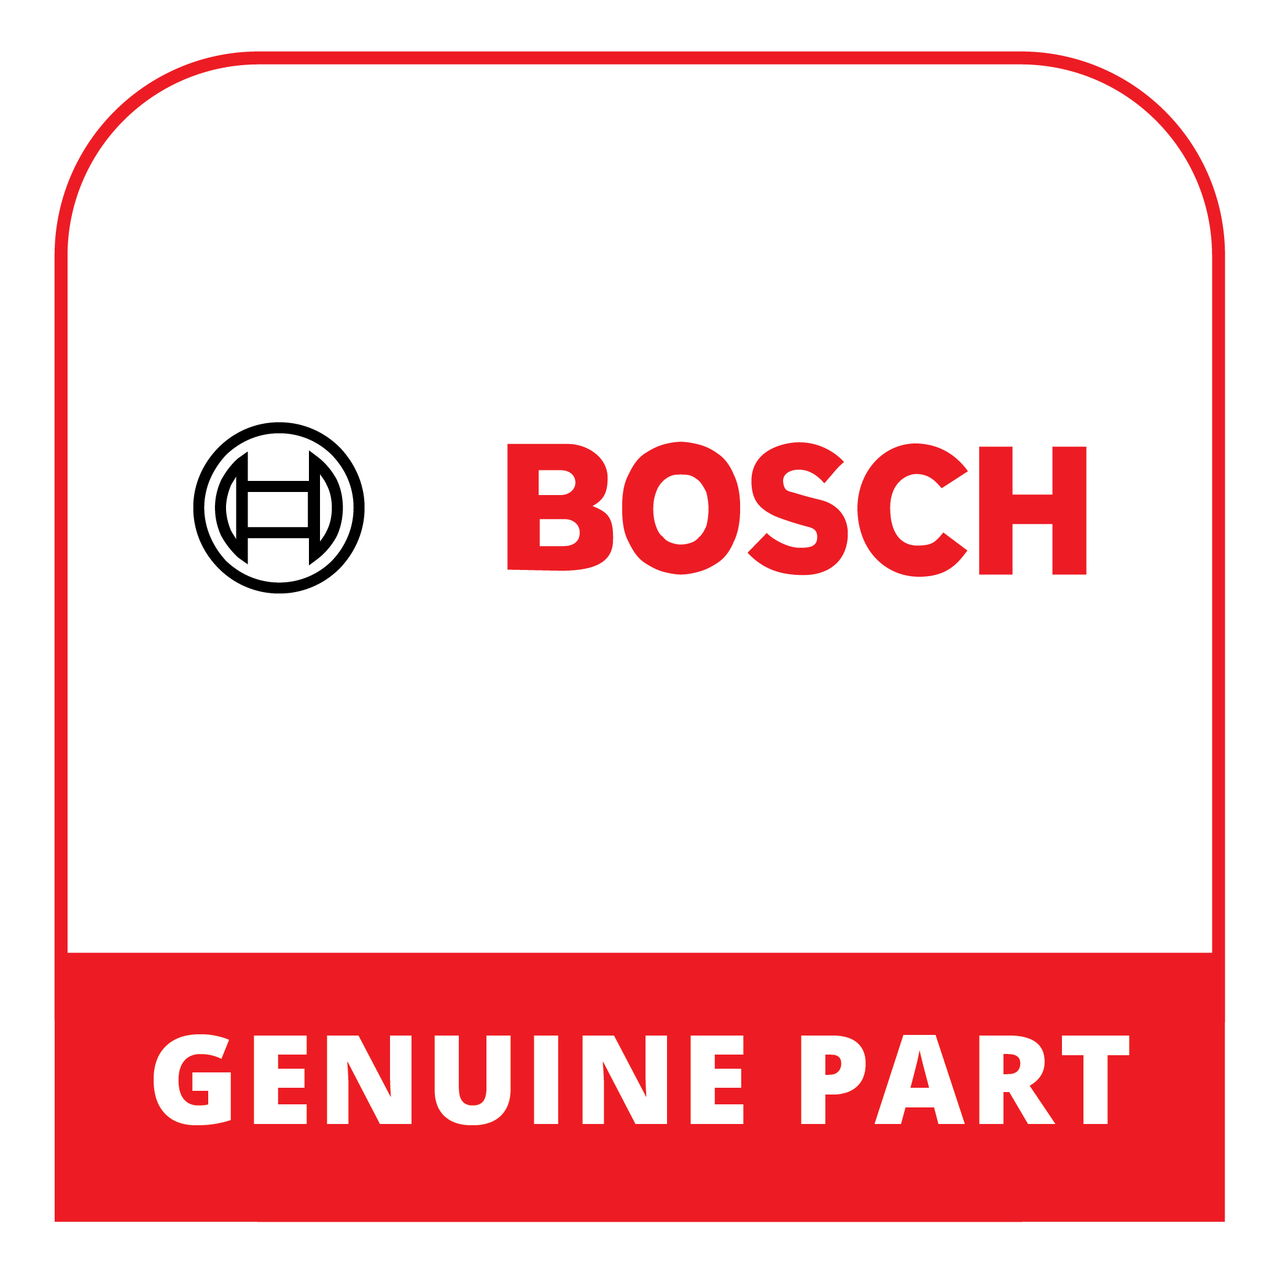 Bosch (Thermador) 00773418 - Gutter Heating - Genuine Bosch (Thermador) Part